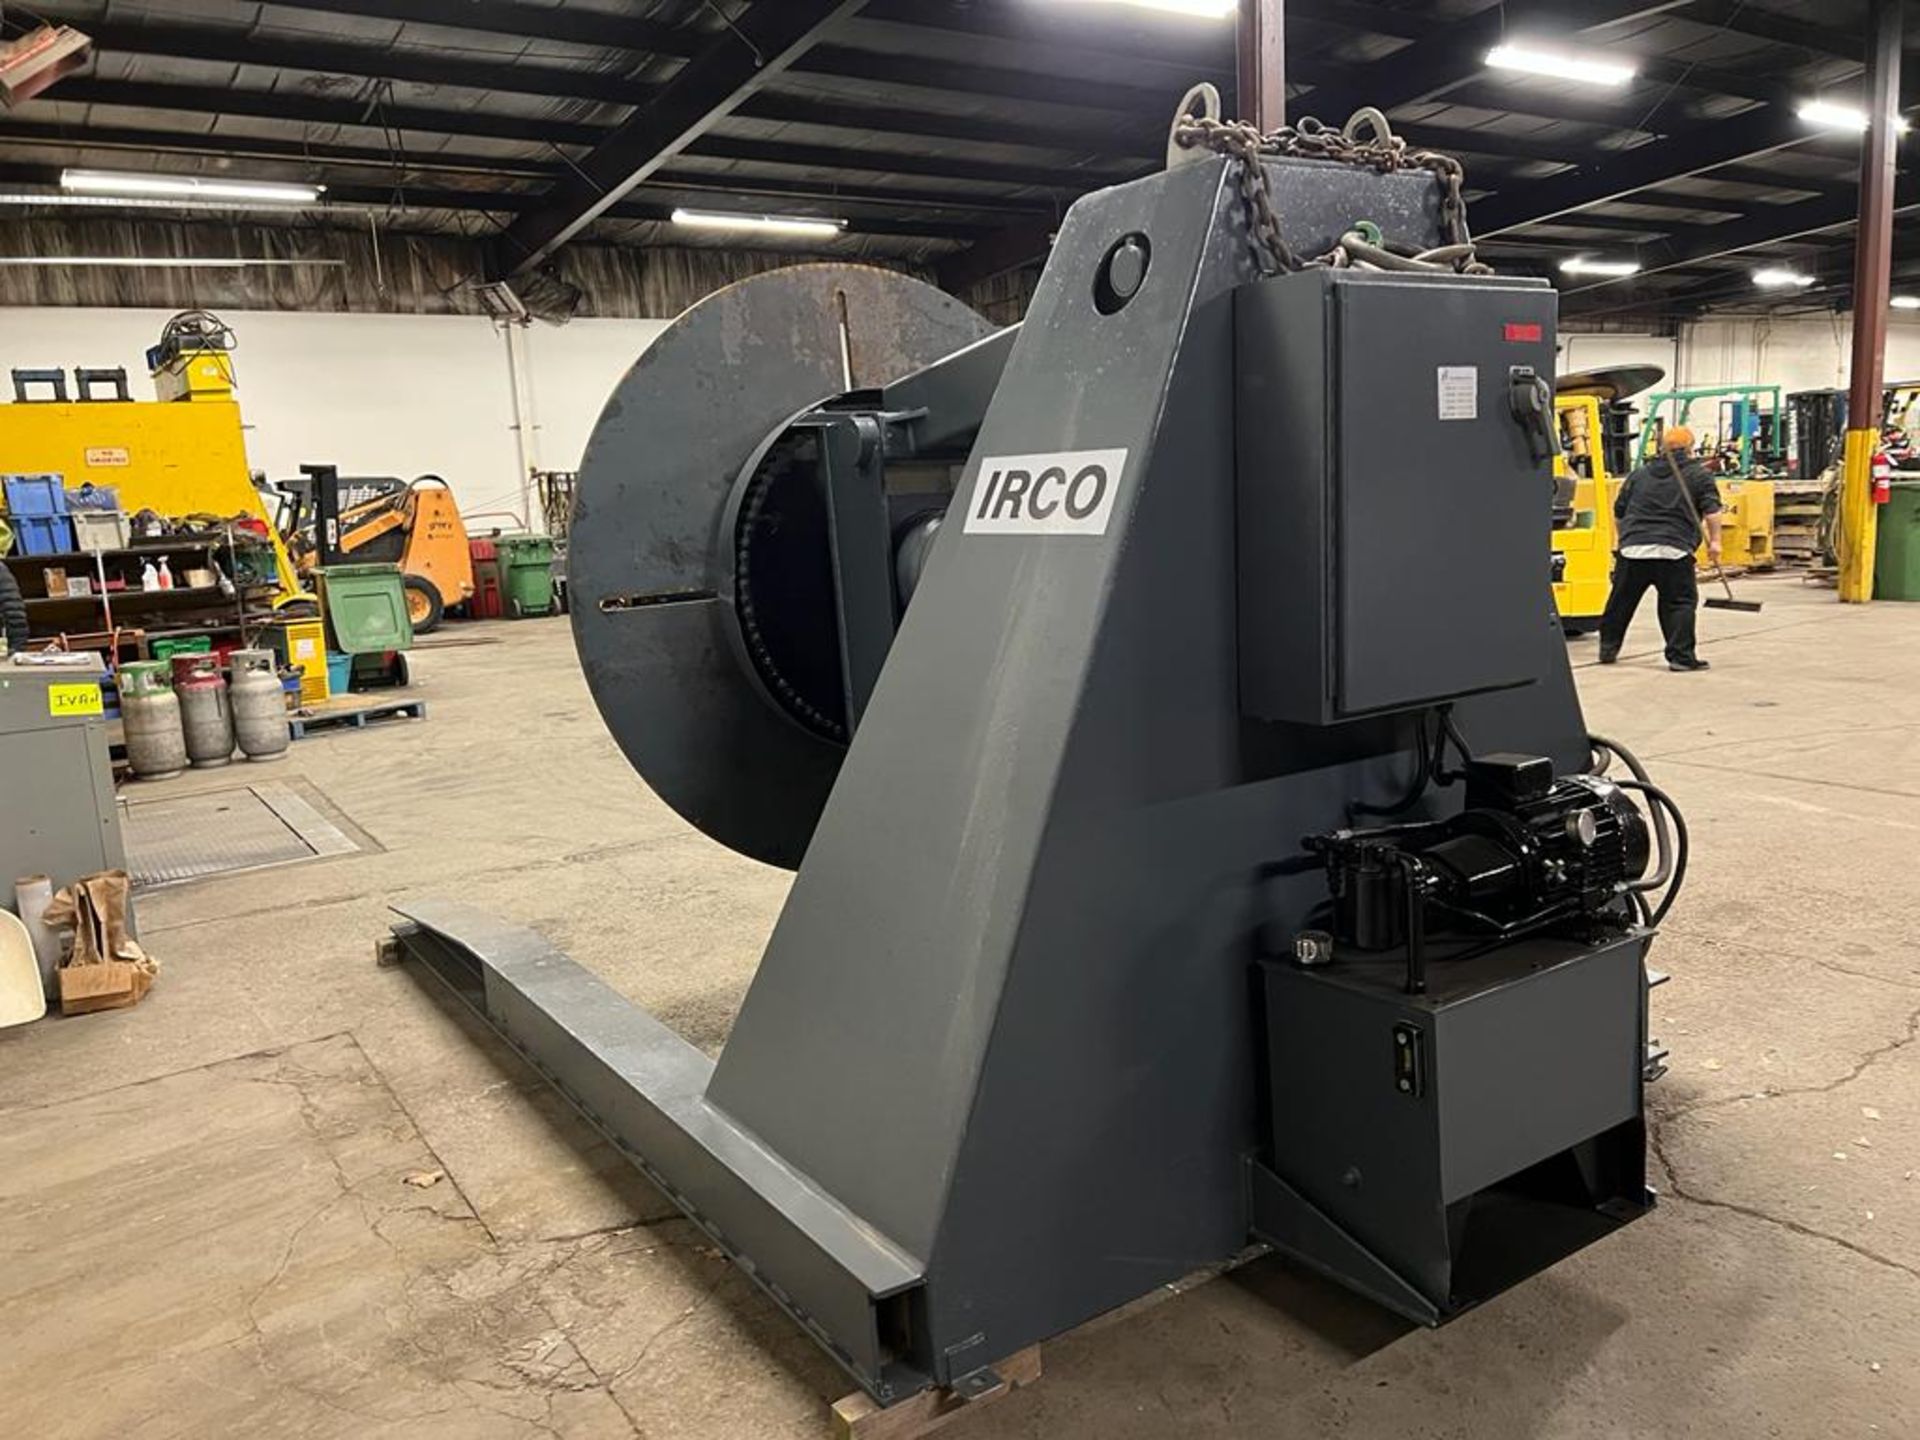 IRCO 16,000lbs Capacity Welding Positioner TILT and ROTATE model 6-16 with pendant controller - Image 4 of 5